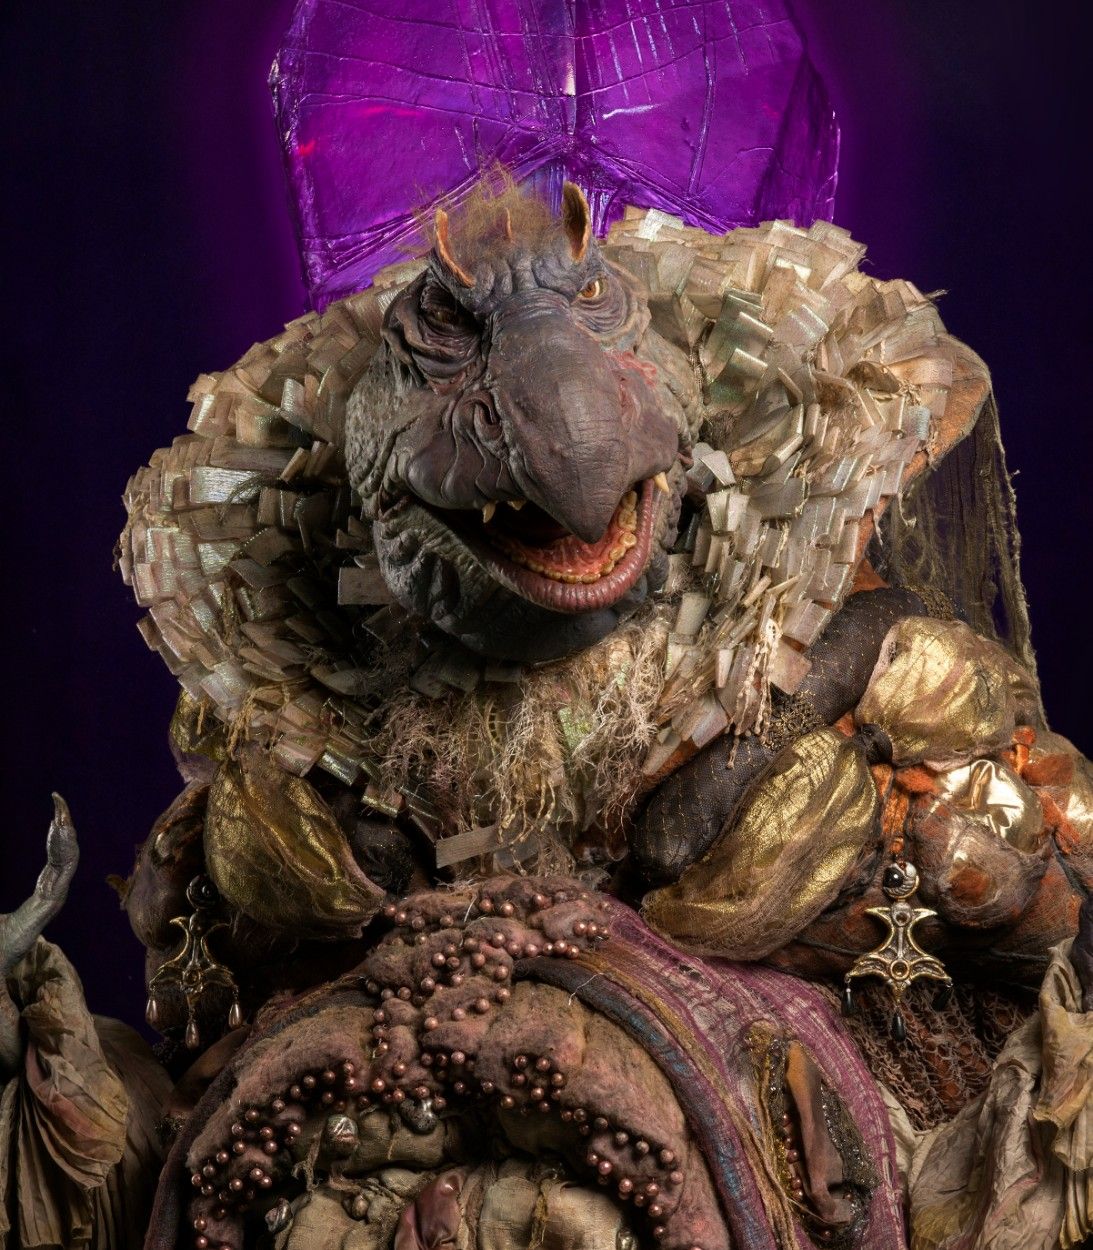 Harvey Fierstein as The Gourmand in Dark Crystal Age of Resistance Vertical